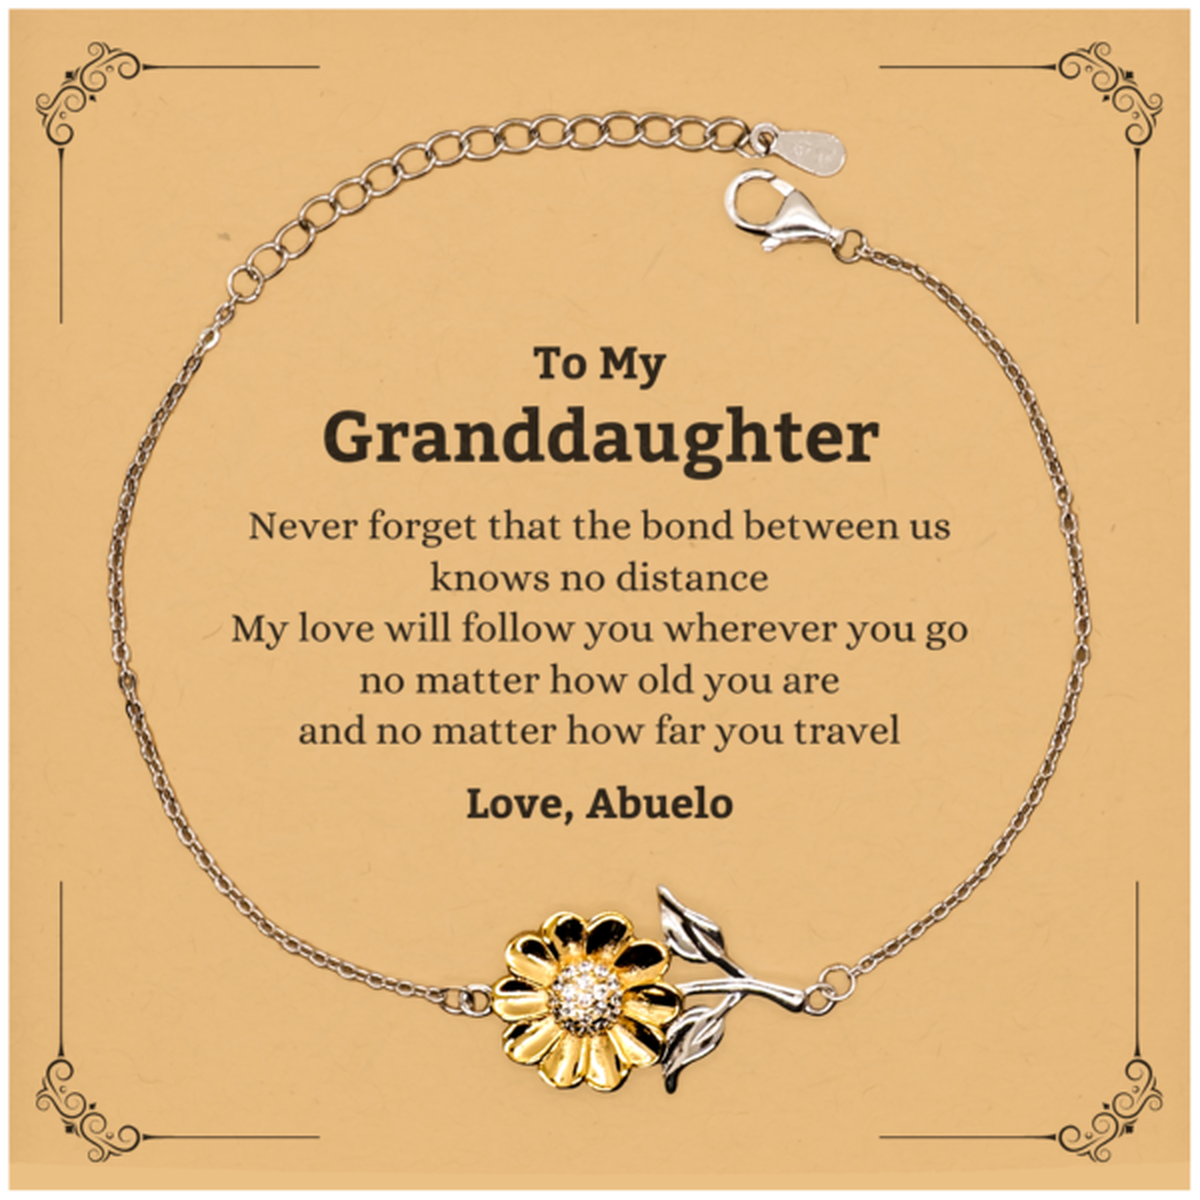 Granddaughter Birthday Gifts from Abuelo, Adjustable Sunflower Bracelet for Granddaughter Christmas Graduation Unique Gifts Granddaughter Never forget that the bond between us knows no distance. Love, Abuelo